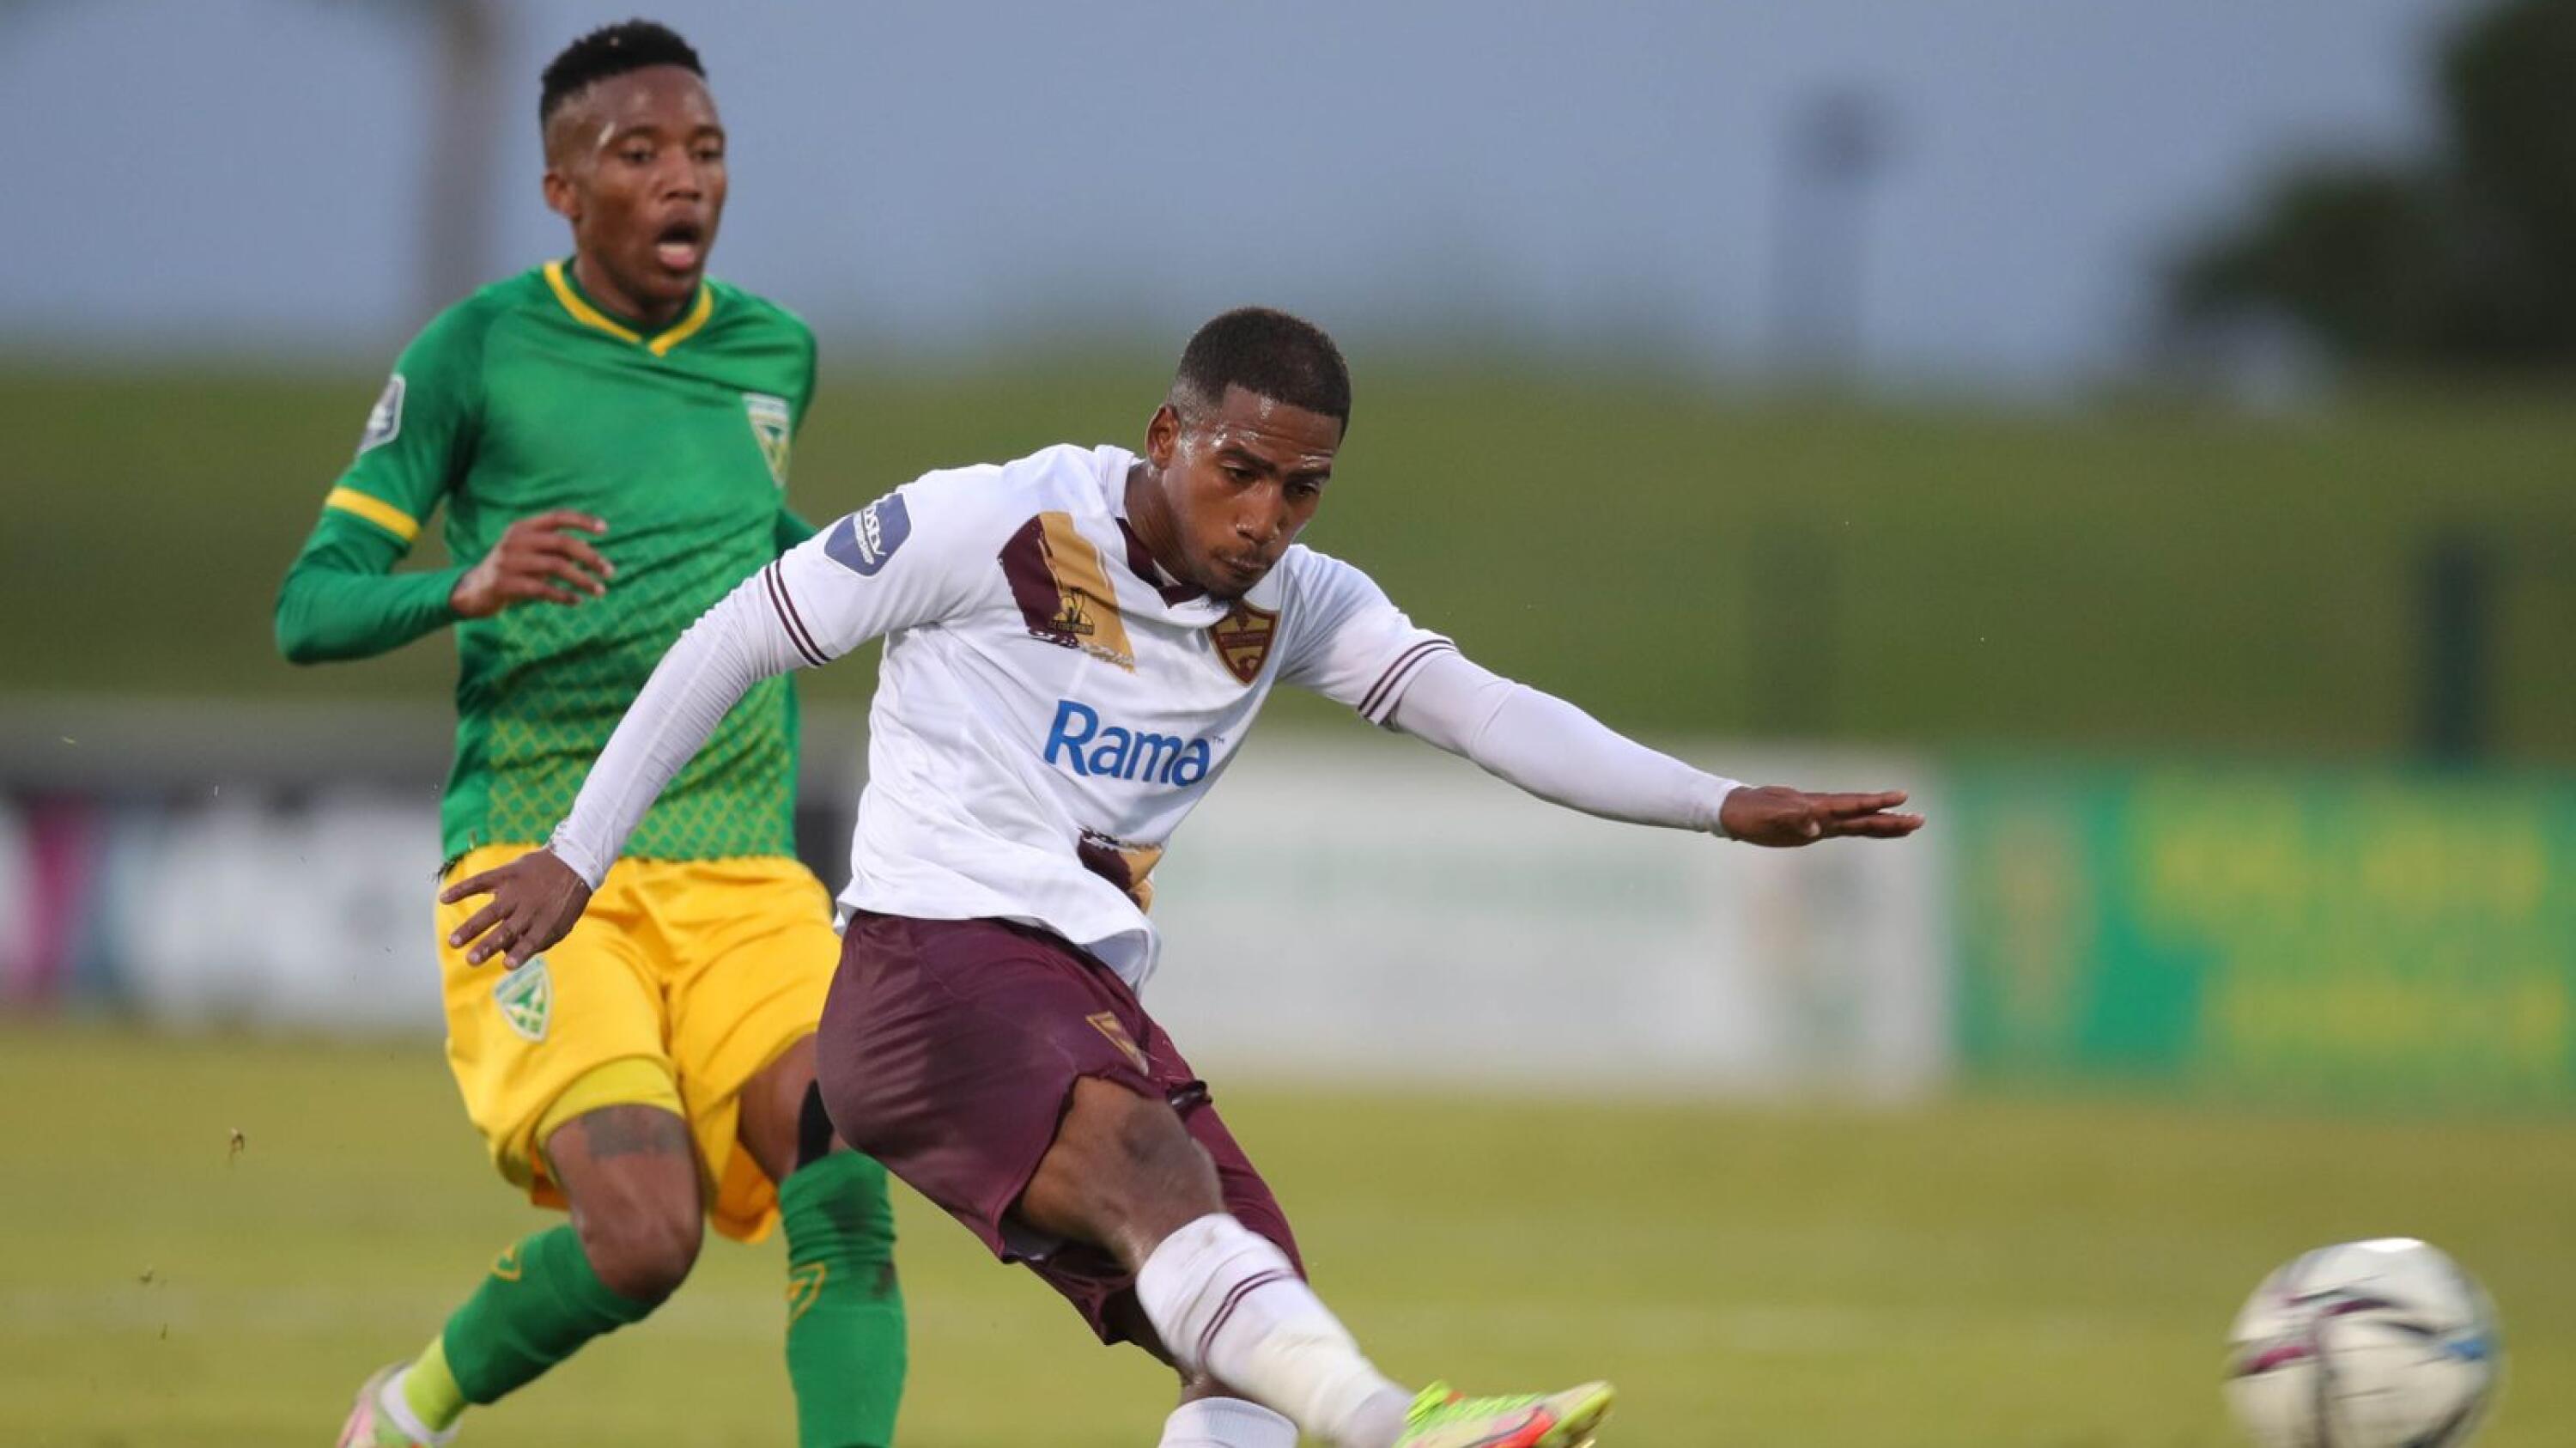 Dean van Rooyen of Stellenbosch FC is challenged by Pule Mmodi of Golden Arrows during their DStv Premiership match at Princess Magogo Stadium in Durban on Wednesday evening